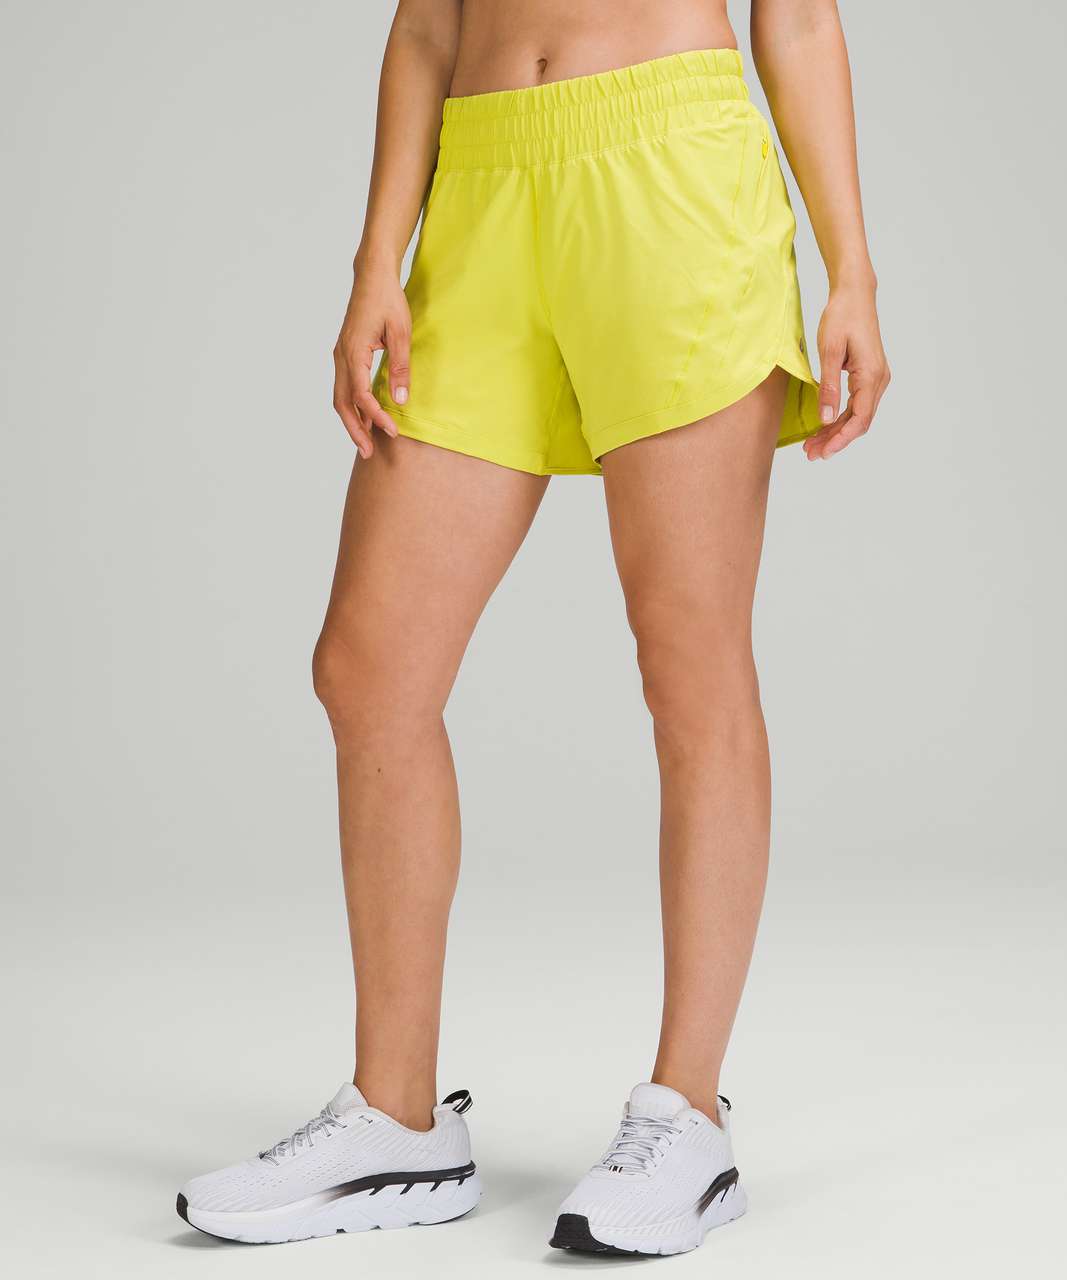 Lululemon Track That Mid-Rise Lined Short 5" - Yellow Serpentine